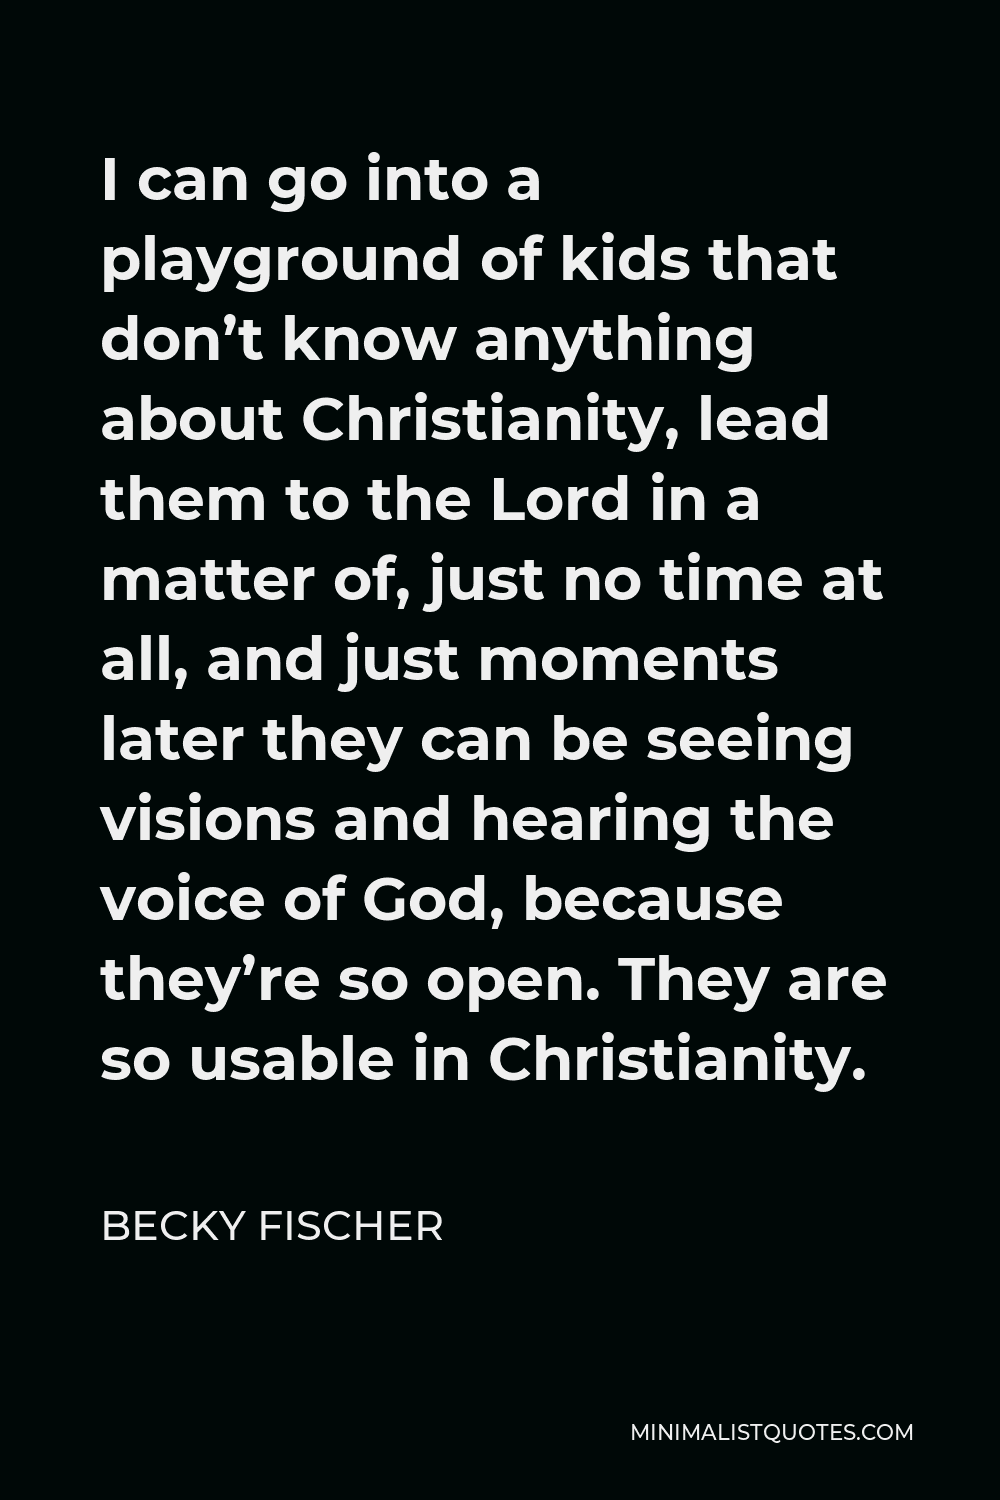 Becky Fischer Quote - I can go into a playground of kids that don’t know anything about Christianity, lead them to the Lord in a matter of, just no time at all, and just moments later they can be seeing visions and hearing the voice of God, because they’re so open. They are so usable in Christianity.